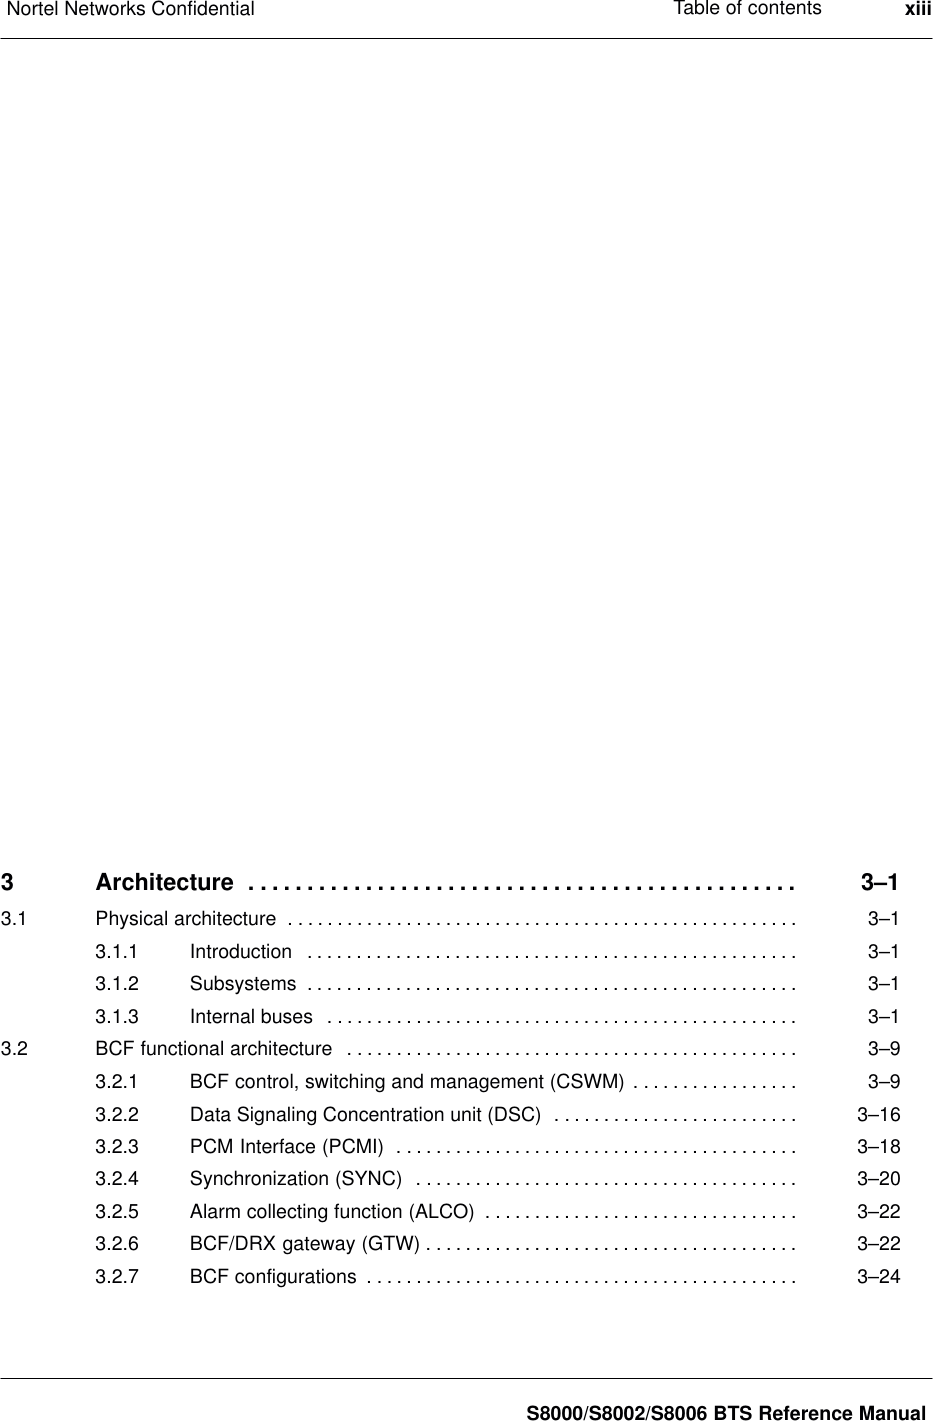 Table of contentsNortel Networks Confidential xiiiS8000/S8002/S8006 BTS Reference Manual3 Architecture 3–1. . . . . . . . . . . . . . . . . . . . . . . . . . . . . . . . . . . . . . . . . . . . . . . 3.1 Physical architecture 3–1. . . . . . . . . . . . . . . . . . . . . . . . . . . . . . . . . . . . . . . . . . . . . . . . . . . . 3.1.1 Introduction 3–1. . . . . . . . . . . . . . . . . . . . . . . . . . . . . . . . . . . . . . . . . . . . . . . . . . 3.1.2 Subsystems 3–1. . . . . . . . . . . . . . . . . . . . . . . . . . . . . . . . . . . . . . . . . . . . . . . . . . 3.1.3 Internal buses 3–1. . . . . . . . . . . . . . . . . . . . . . . . . . . . . . . . . . . . . . . . . . . . . . . . 3.2 BCF functional architecture 3–9. . . . . . . . . . . . . . . . . . . . . . . . . . . . . . . . . . . . . . . . . . . . . . 3.2.1 BCF control, switching and management (CSWM) 3–9. . . . . . . . . . . . . . . . . 3.2.2 Data Signaling Concentration unit (DSC) 3–16. . . . . . . . . . . . . . . . . . . . . . . . . 3.2.3 PCM Interface (PCMI) 3–18. . . . . . . . . . . . . . . . . . . . . . . . . . . . . . . . . . . . . . . . . 3.2.4 Synchronization (SYNC) 3–20. . . . . . . . . . . . . . . . . . . . . . . . . . . . . . . . . . . . . . . 3.2.5 Alarm collecting function (ALCO) 3–22. . . . . . . . . . . . . . . . . . . . . . . . . . . . . . . . 3.2.6 BCF/DRX gateway (GTW) 3–22. . . . . . . . . . . . . . . . . . . . . . . . . . . . . . . . . . . . . . 3.2.7 BCF configurations 3–24. . . . . . . . . . . . . . . . . . . . . . . . . . . . . . . . . . . . . . . . . . . . 